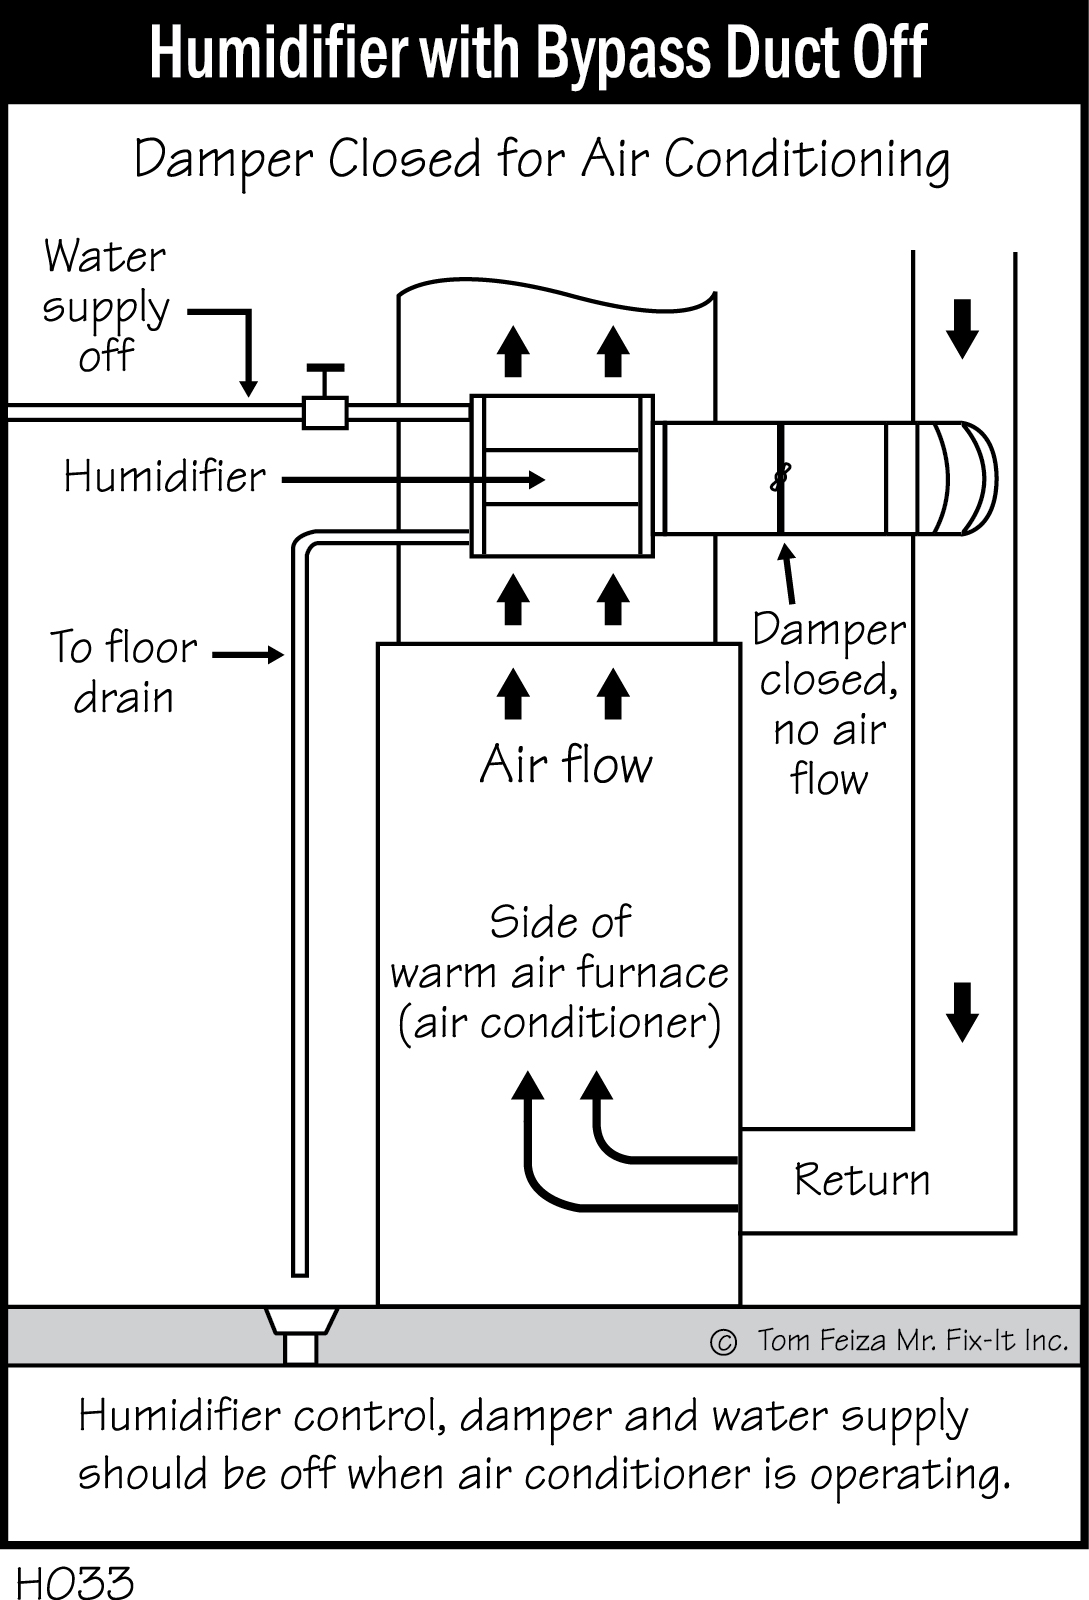 H033 - Humidifier with Bypass Duct Off